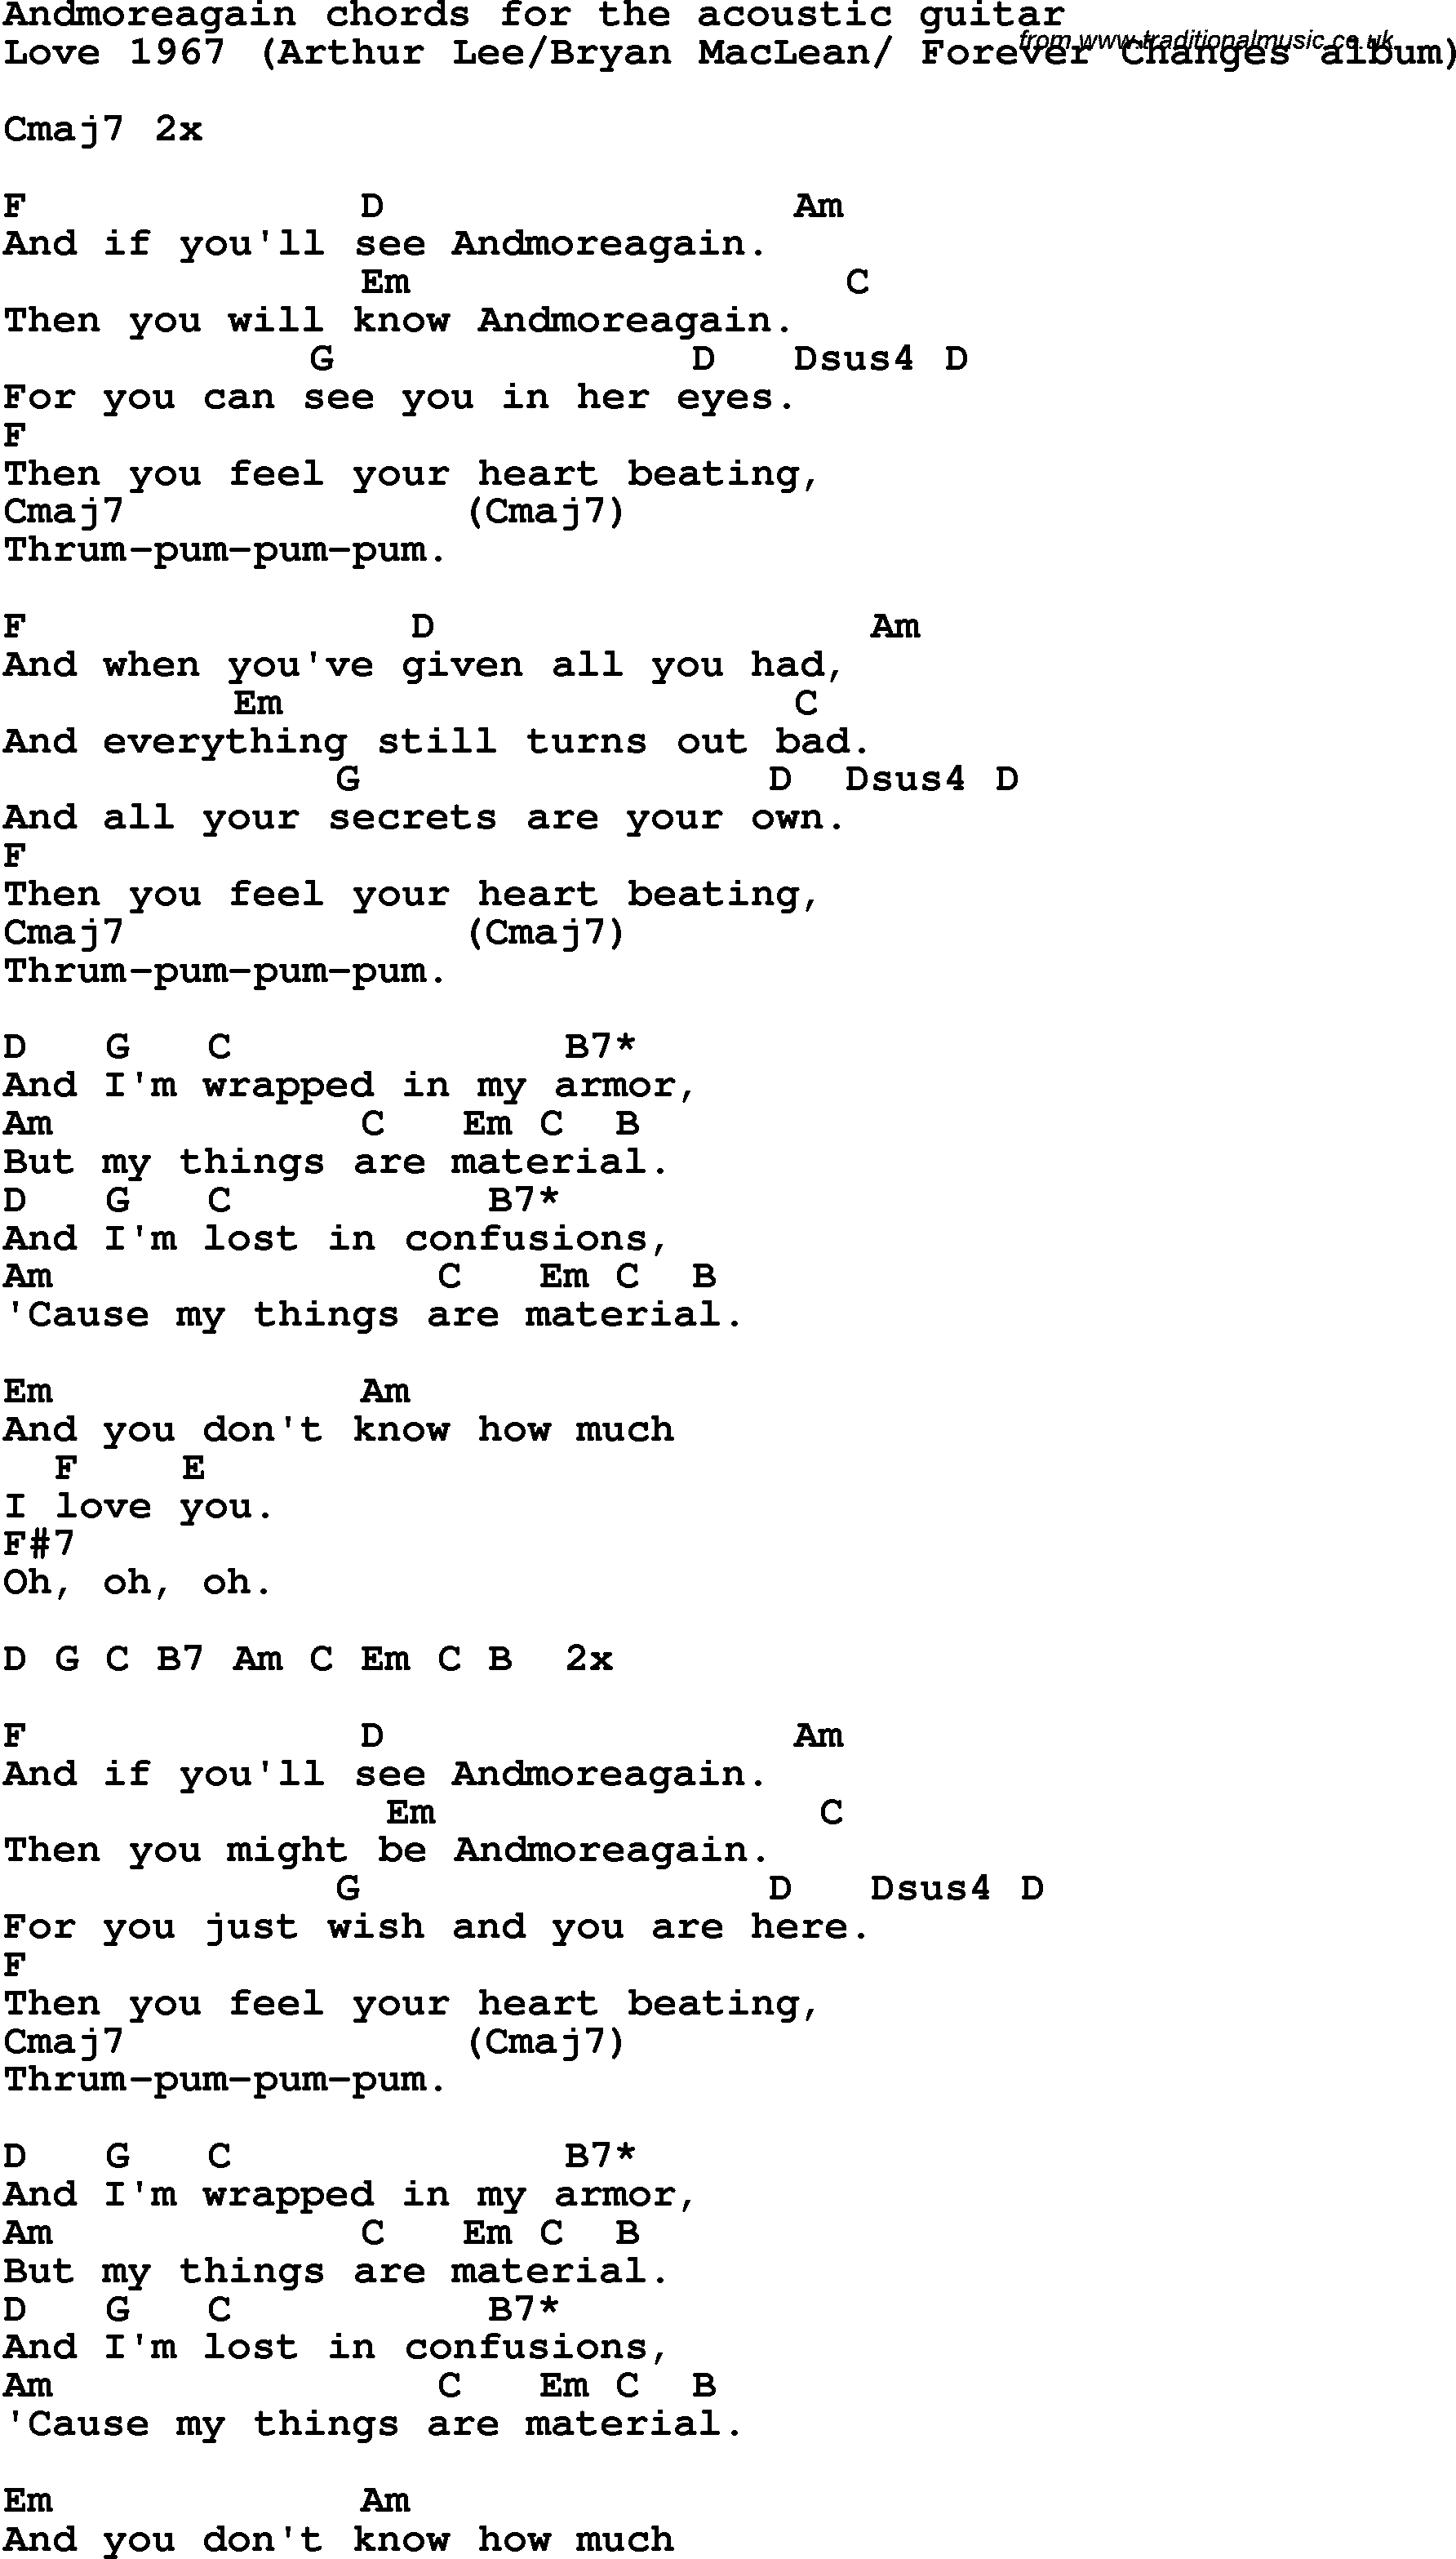 Song Lyrics with guitar chords for And More Again